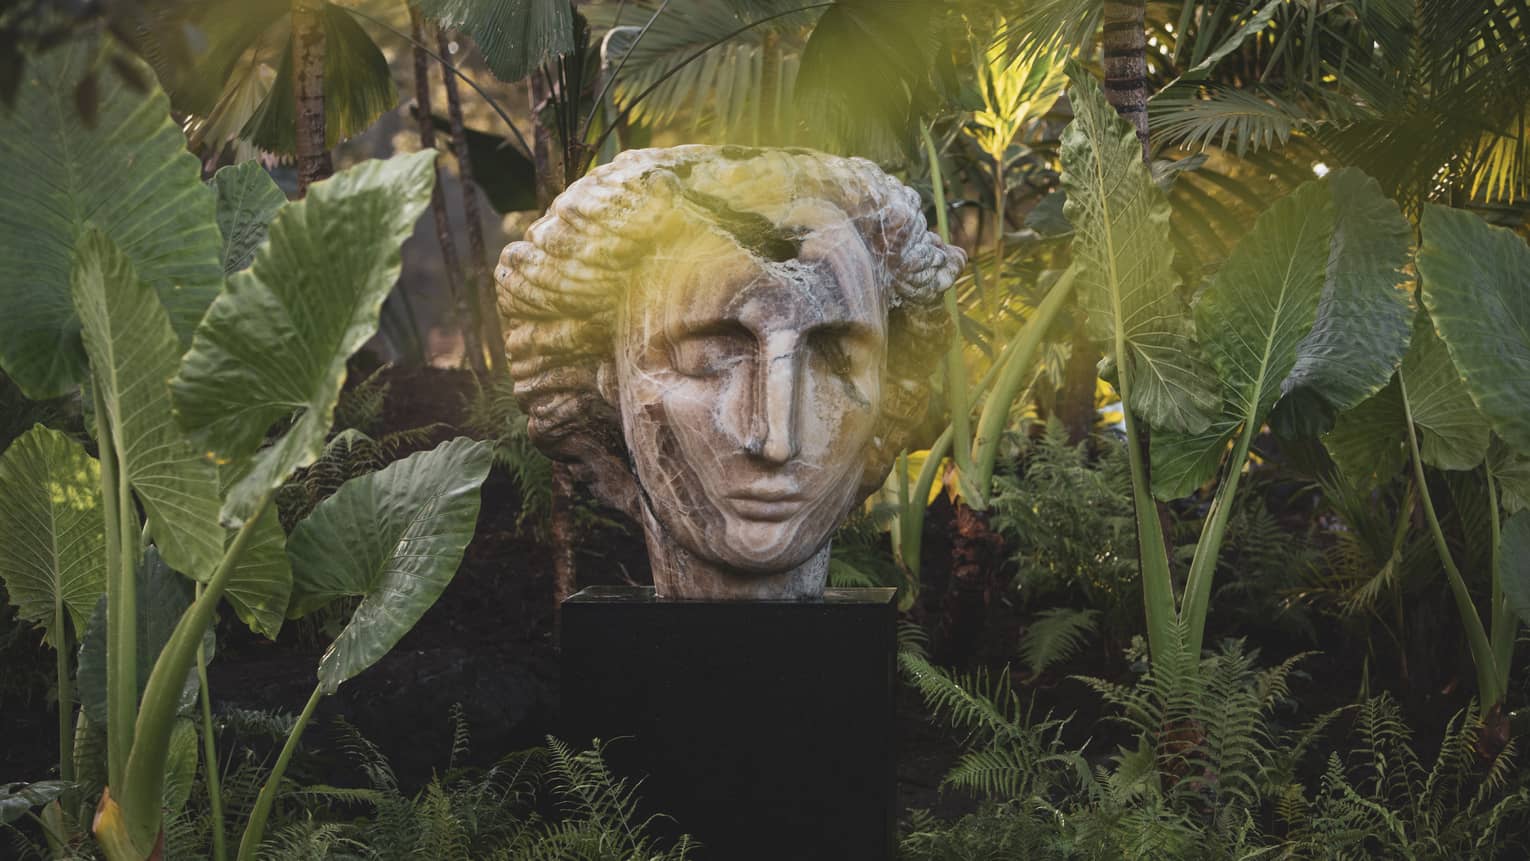 Bust with closed eyes amid tropical foliage